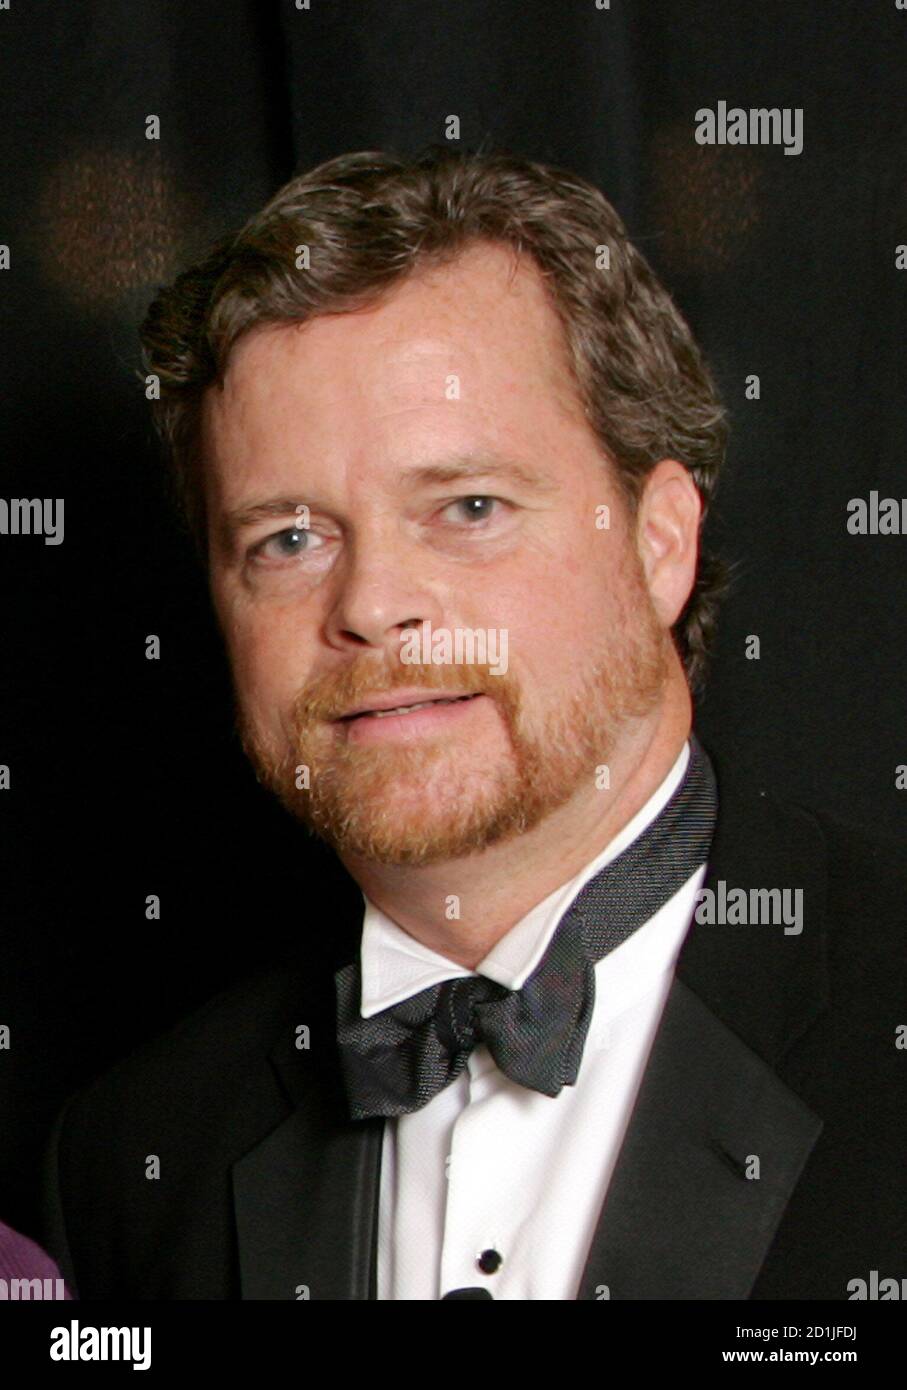 Nike brand co-President Mark Parker attends an awards event at Nike World  Headquarters in Beaverton, Oregon, in this October 20, 2005 file picture.  Parker replaces Nike Inc. Chief Executive William Perez who